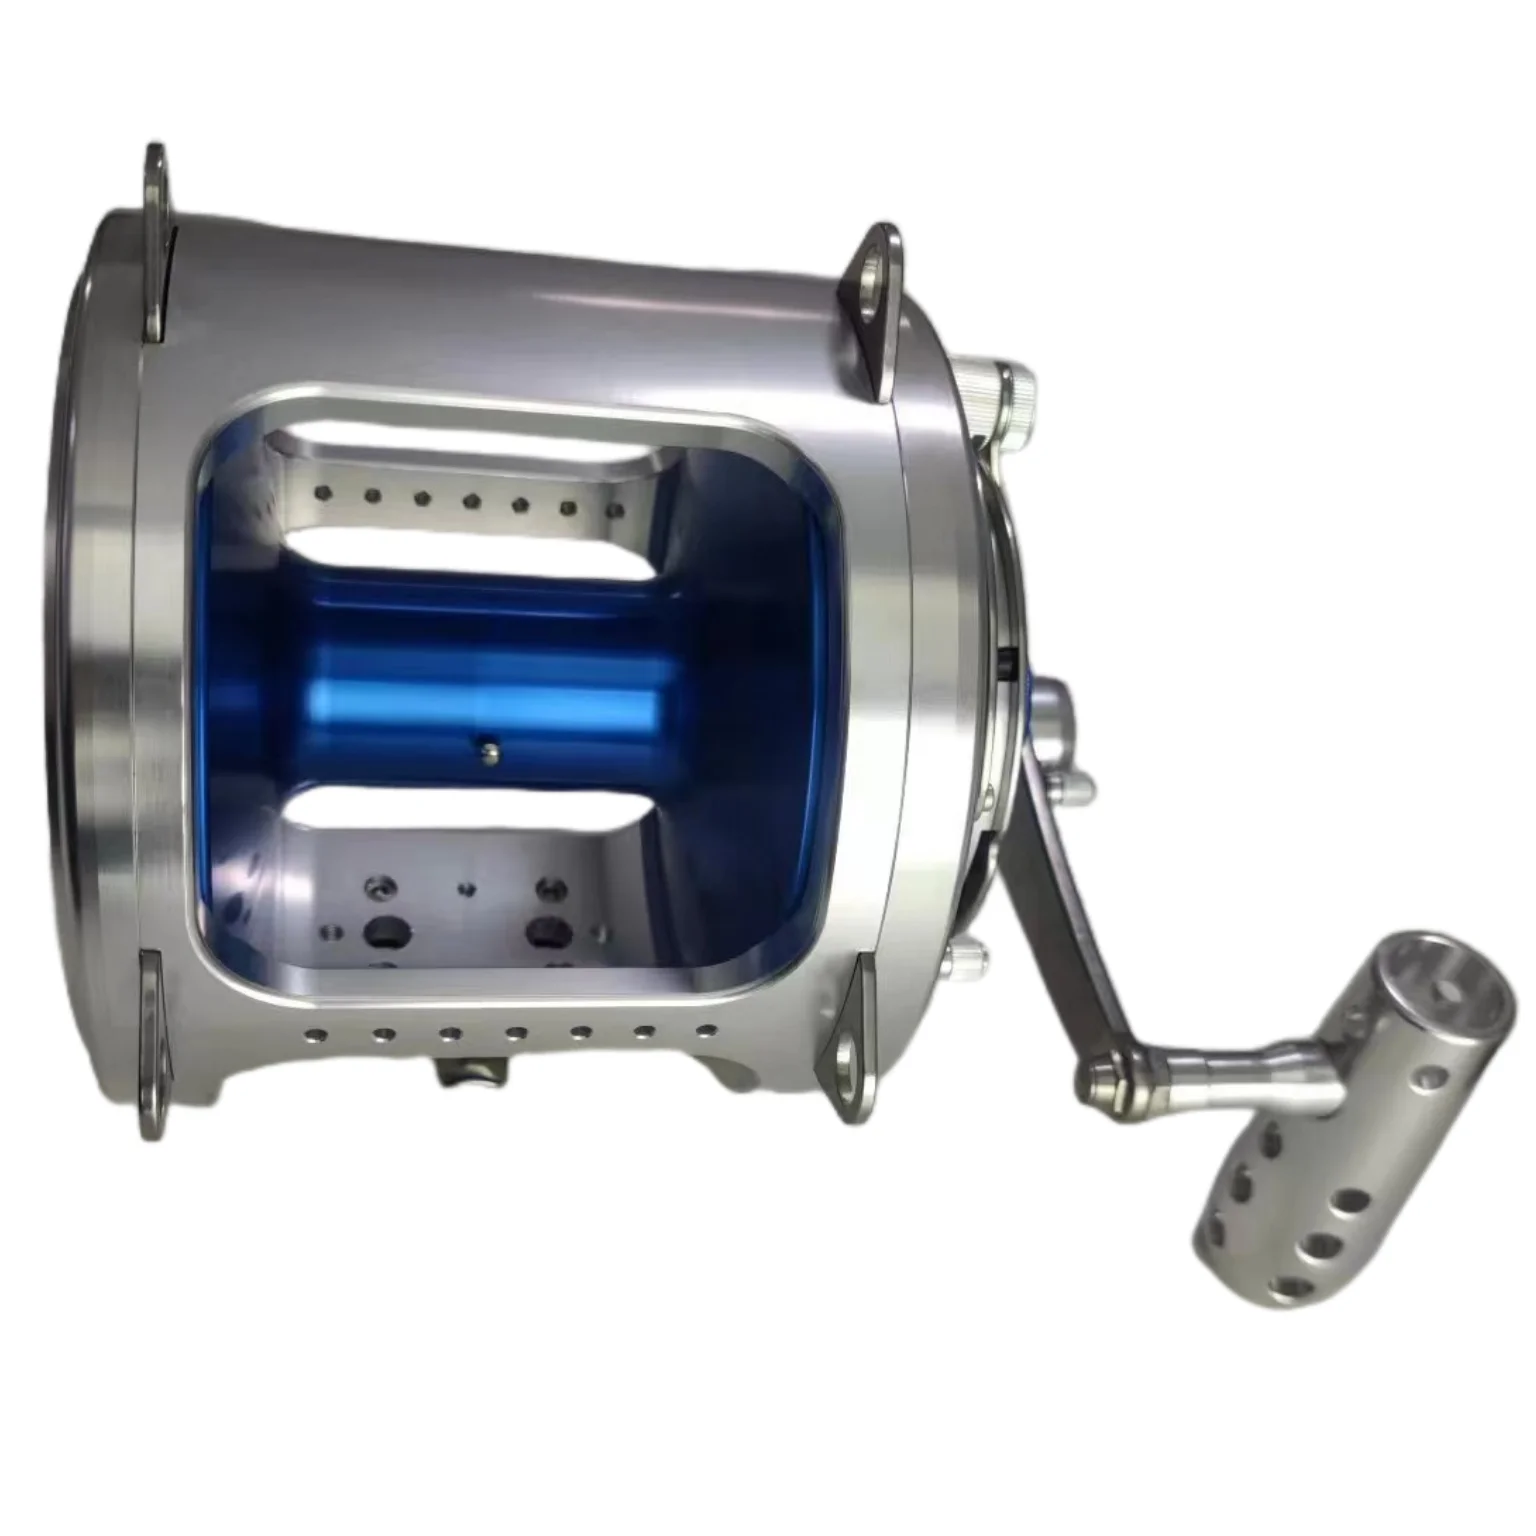 

Manufacture Supply HT801-130W 2 Speed Big Game Dual drag 130W 80kg Saltwater Conventional Trolling Fishing Reel